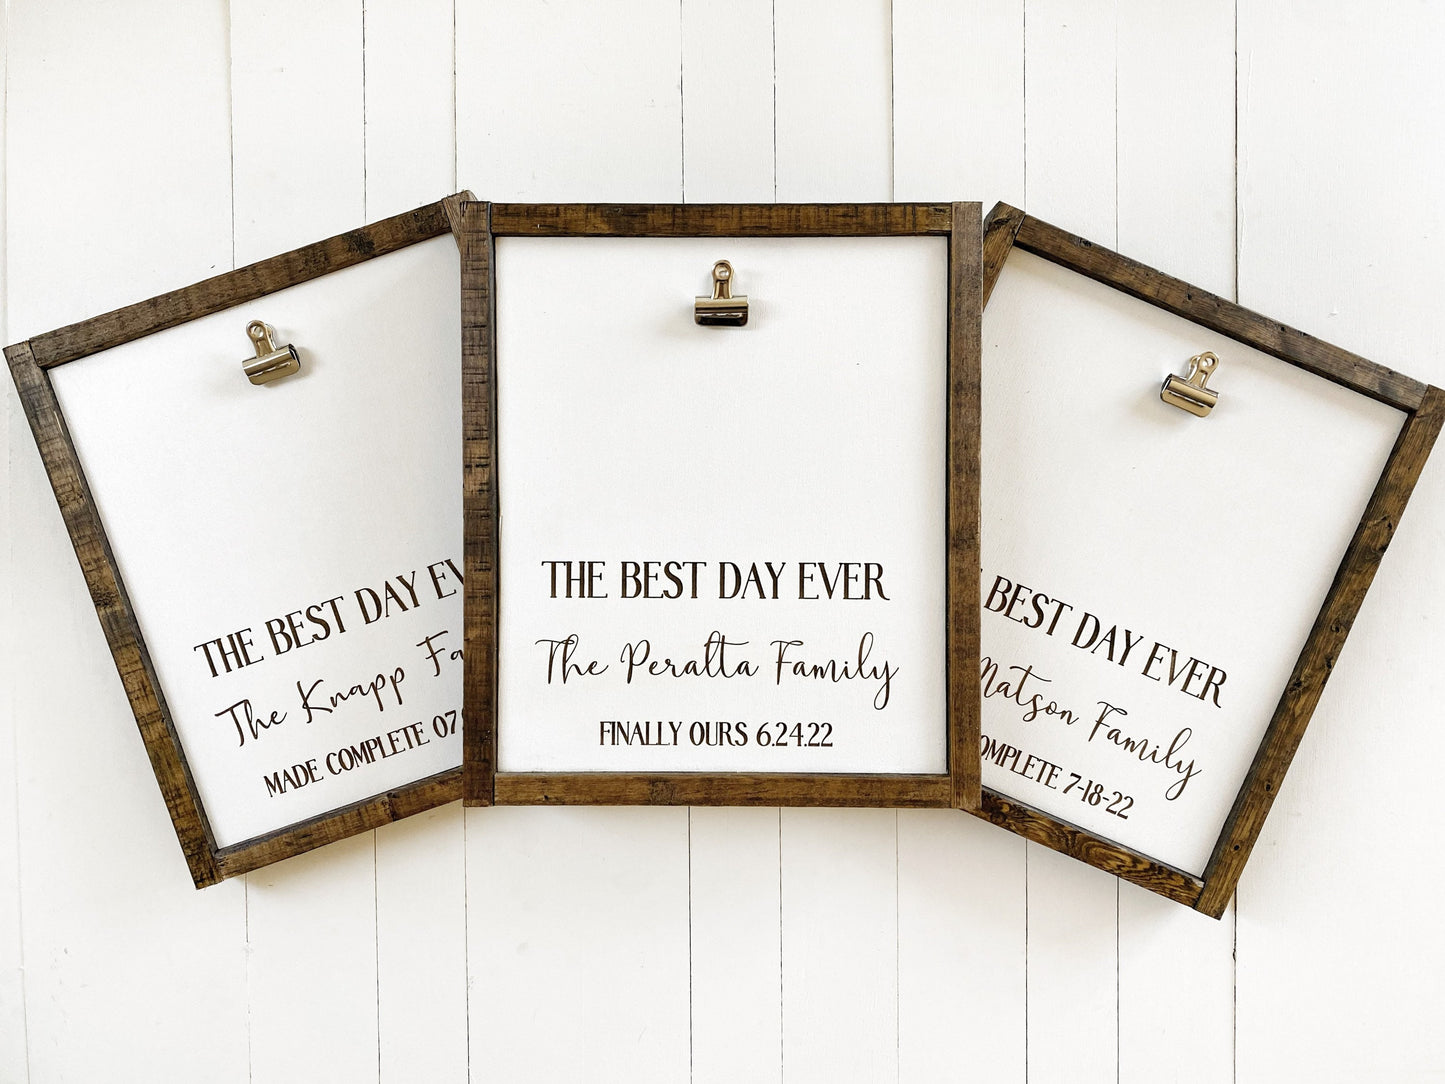 Best Day Ever, Personalized Adoption Day Photo Frame Clipboard Gift for Families with Dates and Names